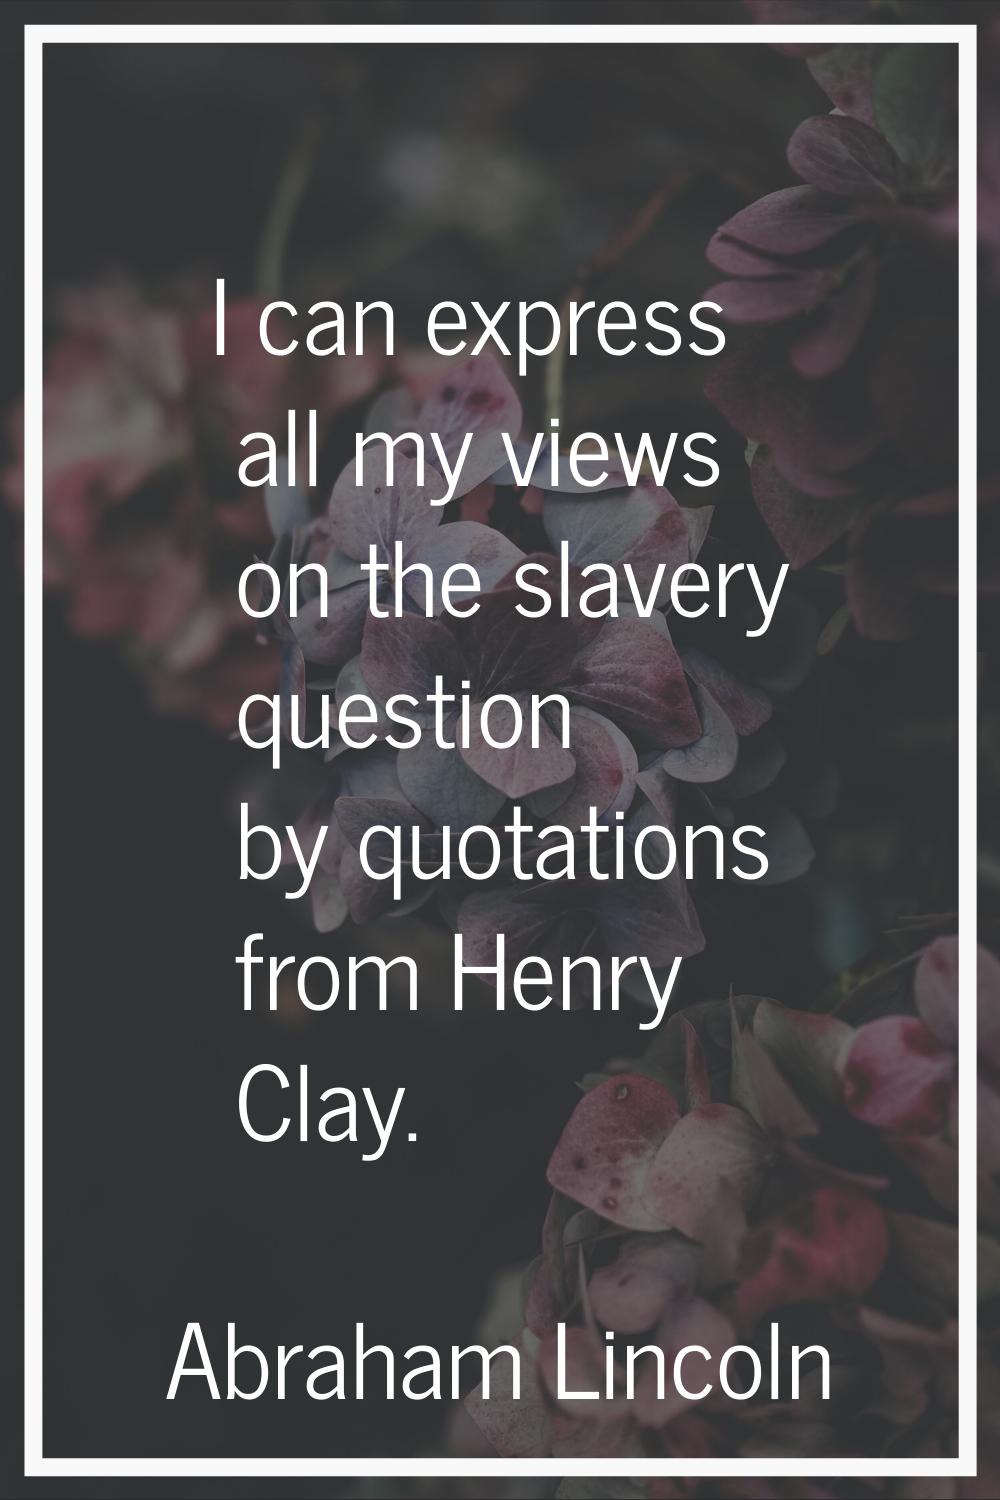 I can express all my views on the slavery question by quotations from Henry Clay.